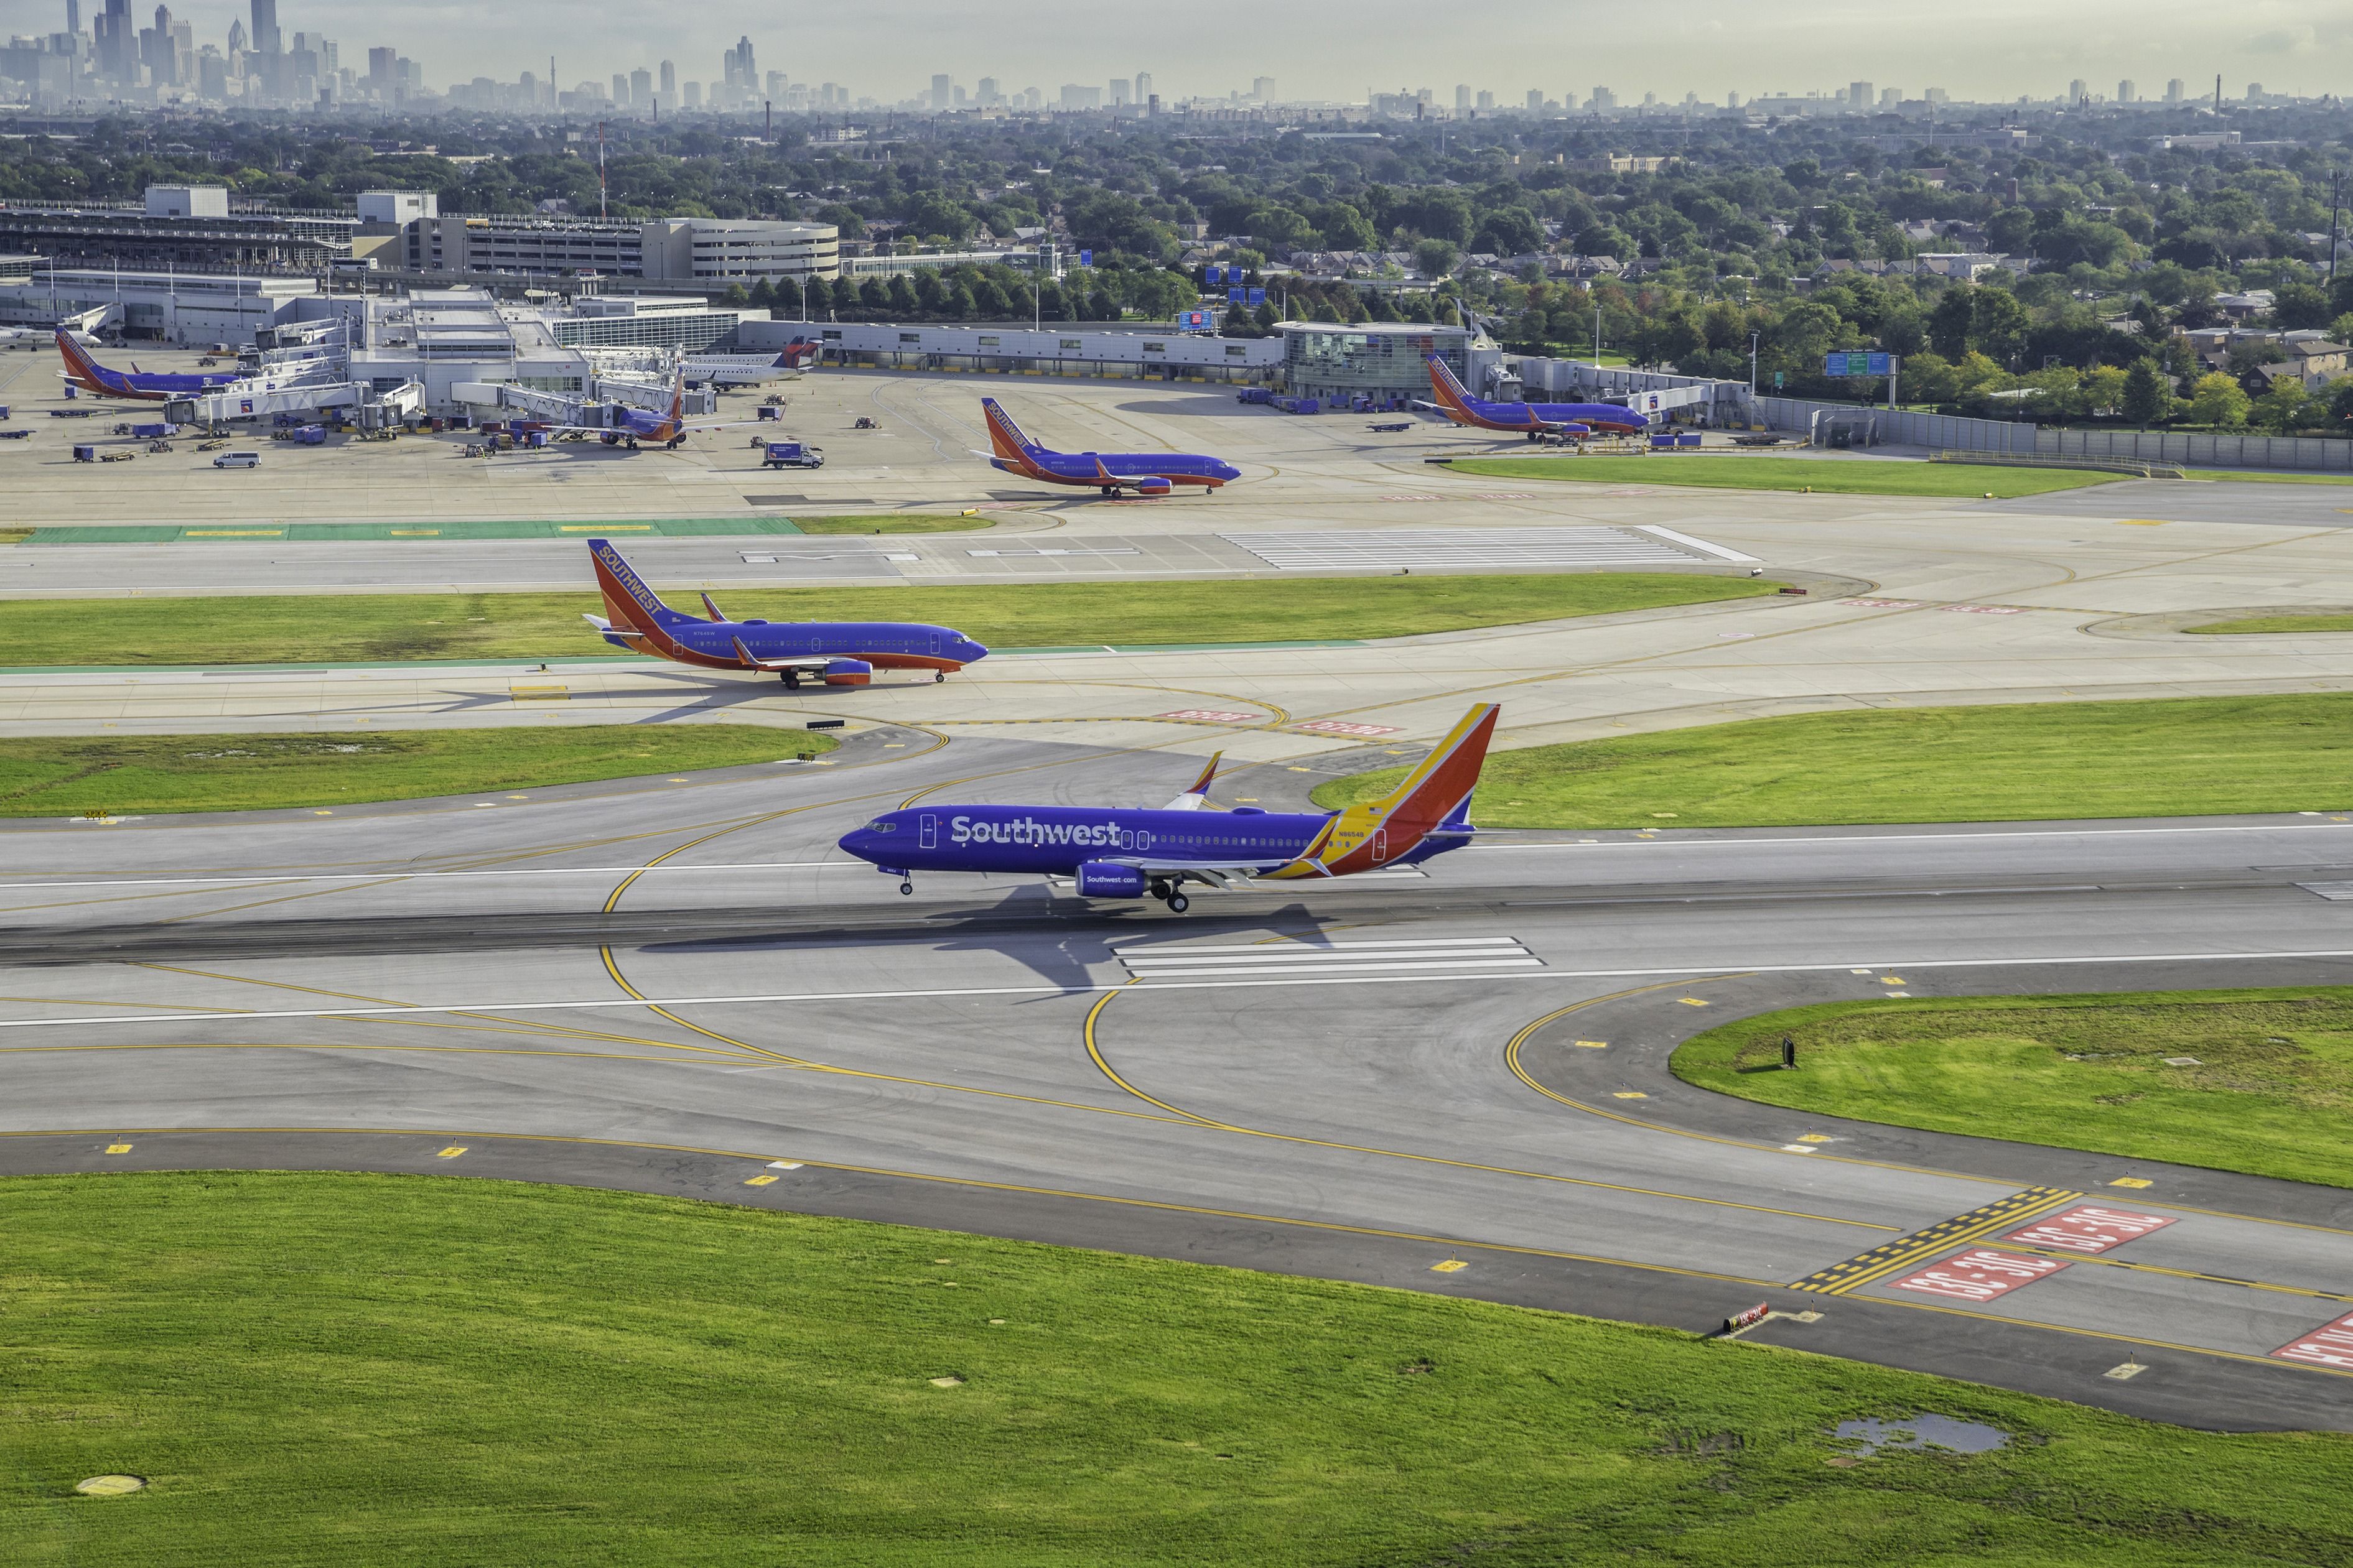 Southwest Airlines planes at Midway International Airport.